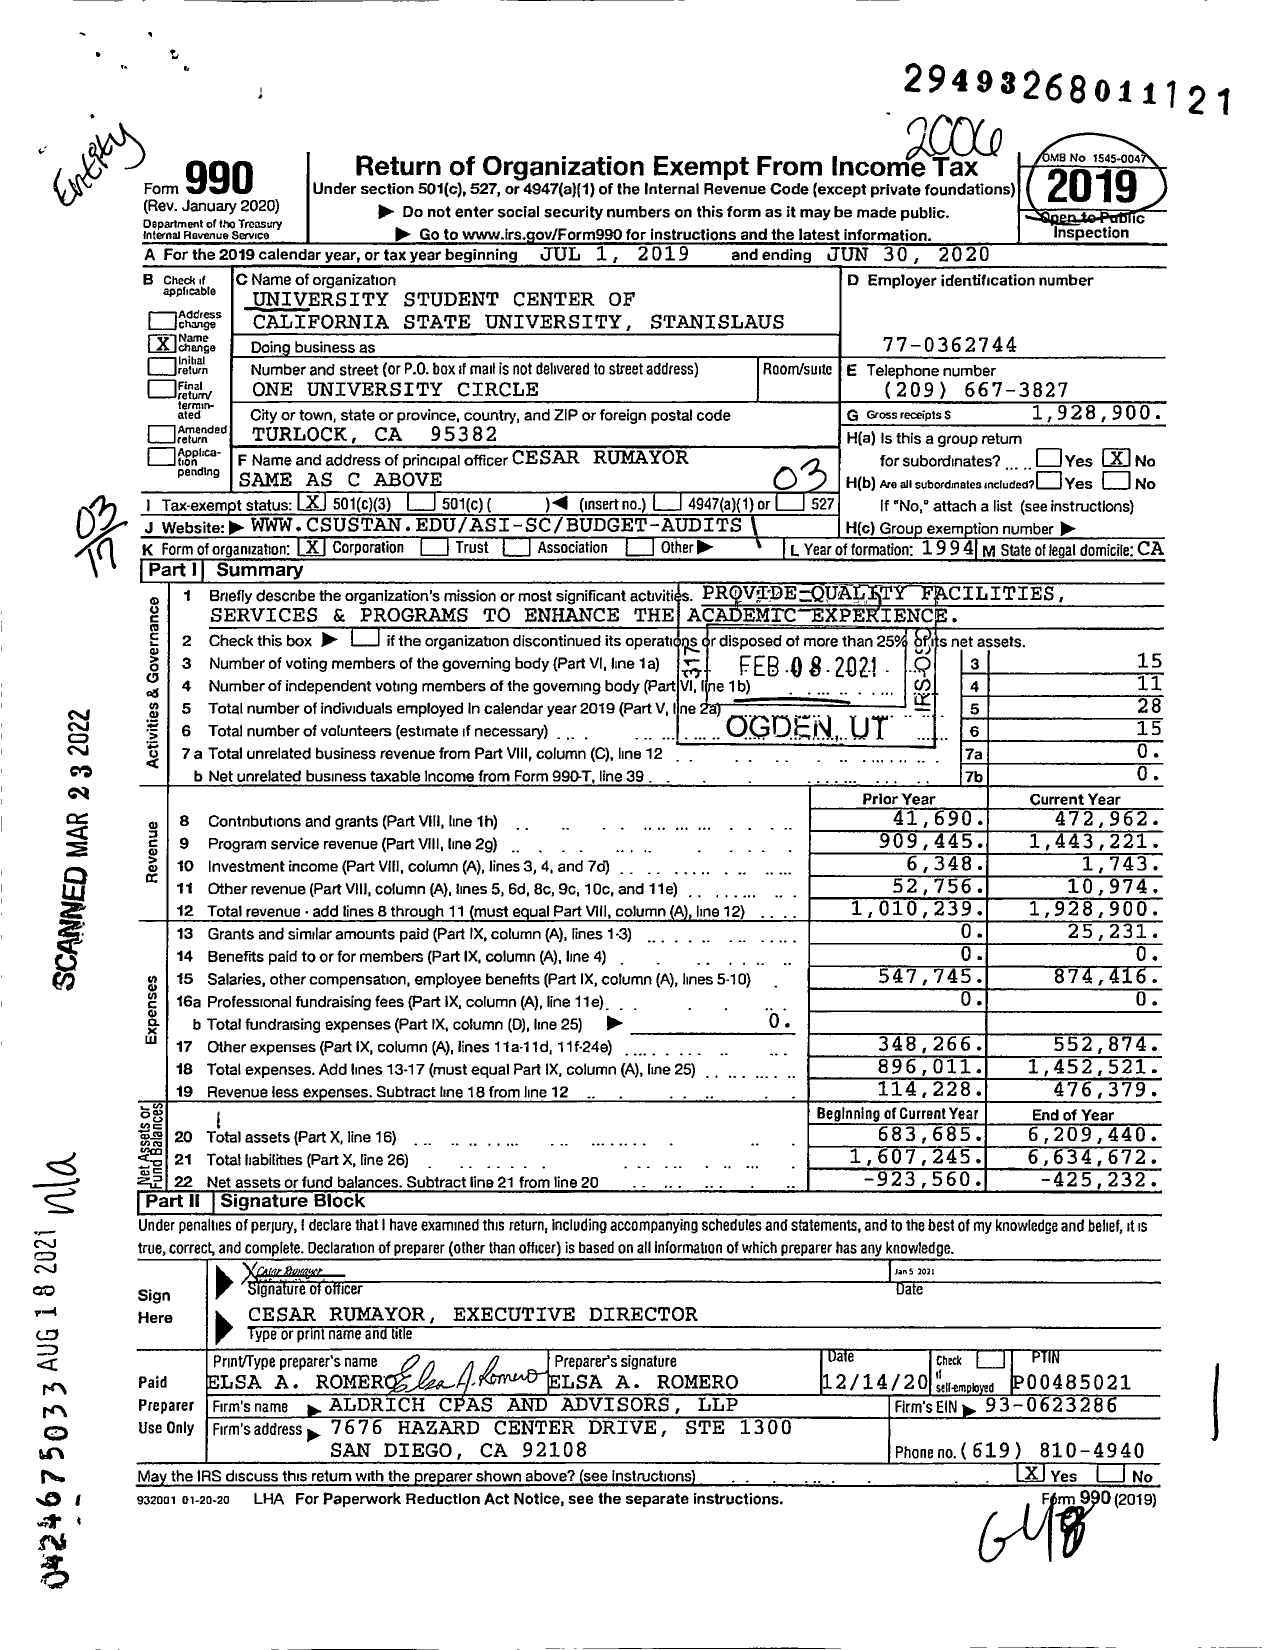 Image of first page of 2019 Form 990 for University Student Center of California State University Stanislaus